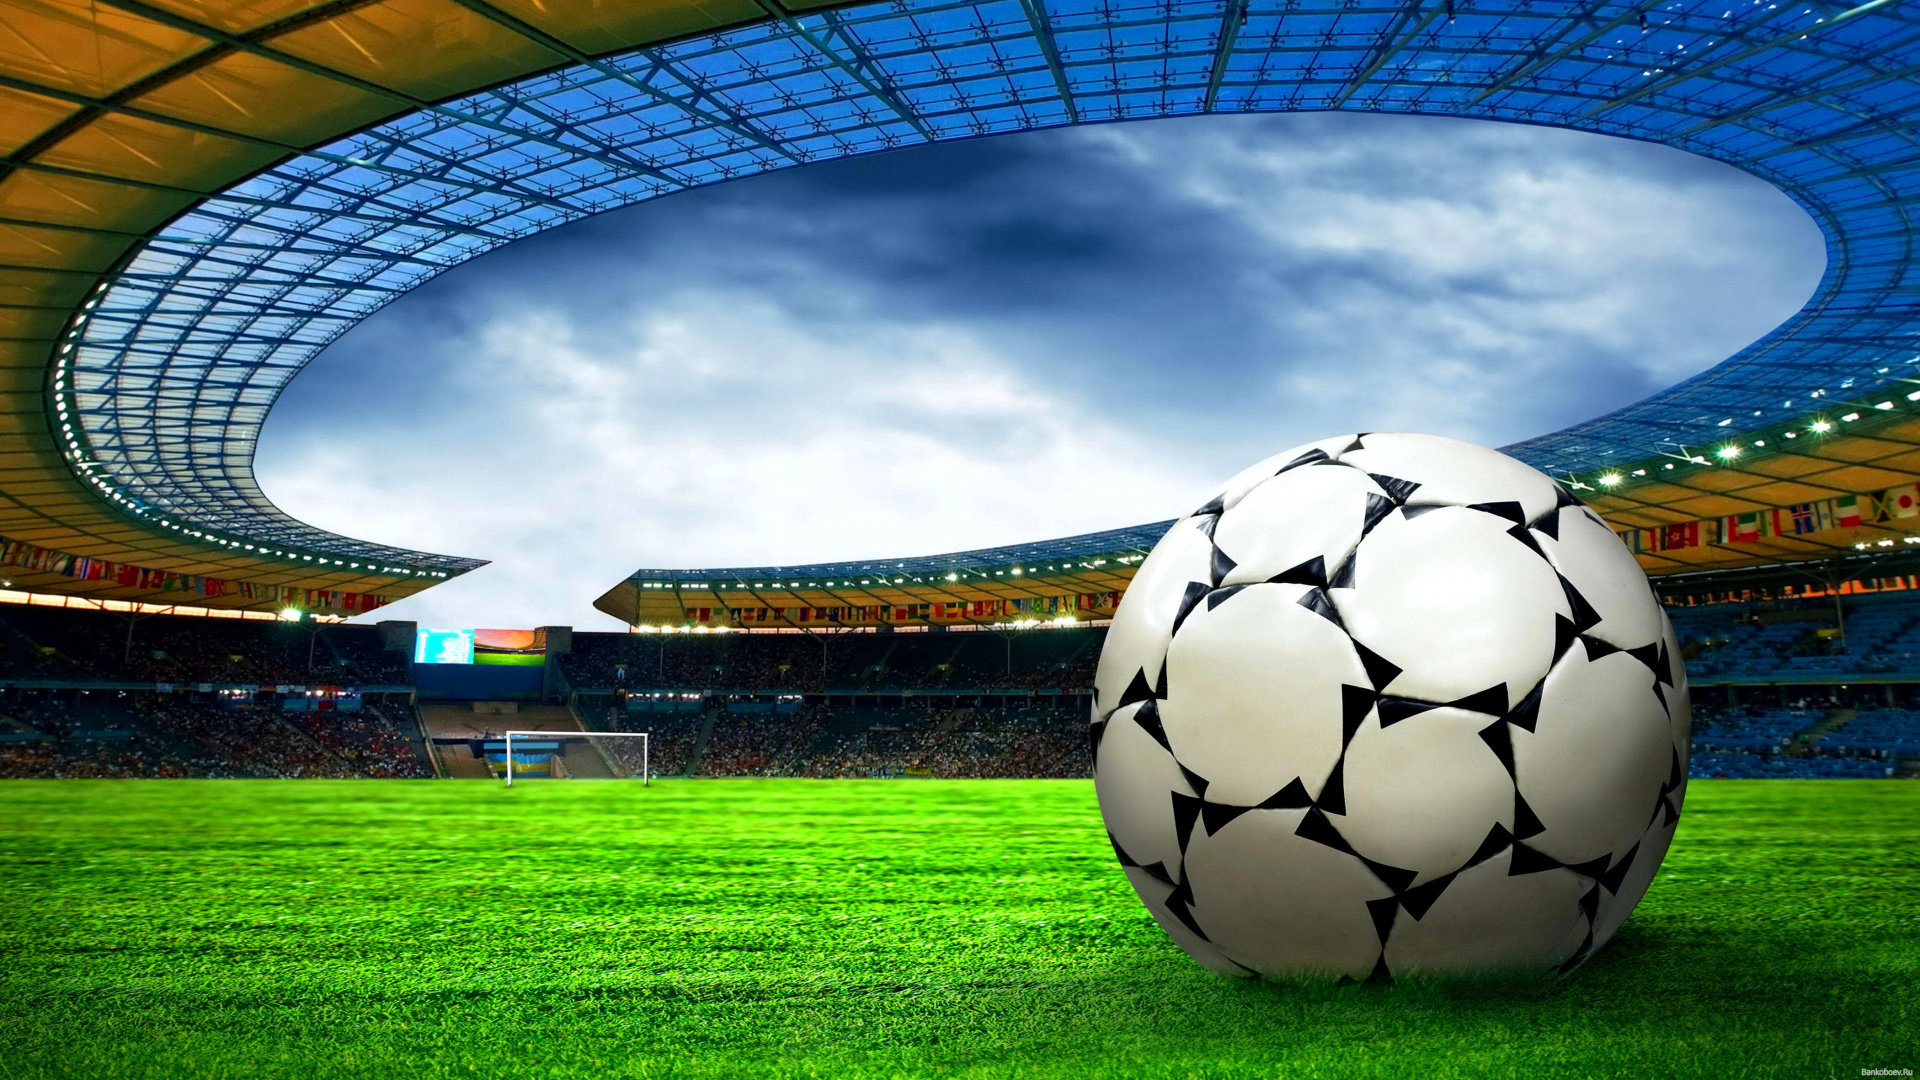 Soccer Ball on Green Grass Field Under White Clouds During Daytime. Wallpaper in 1920x1080 Resolution